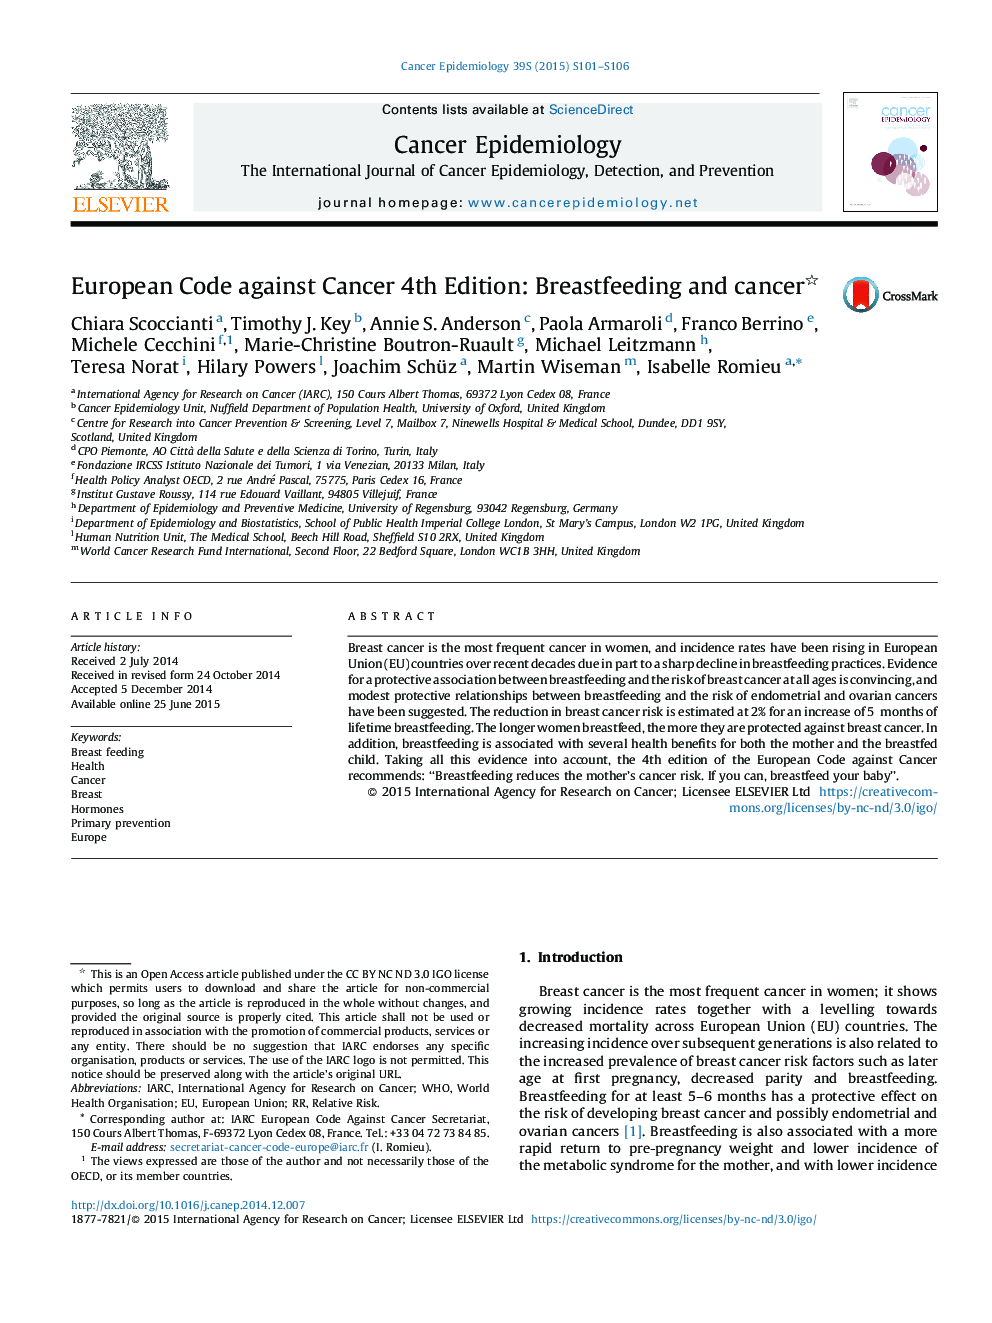 European Code against Cancer 4th Edition: Breastfeeding and cancer 